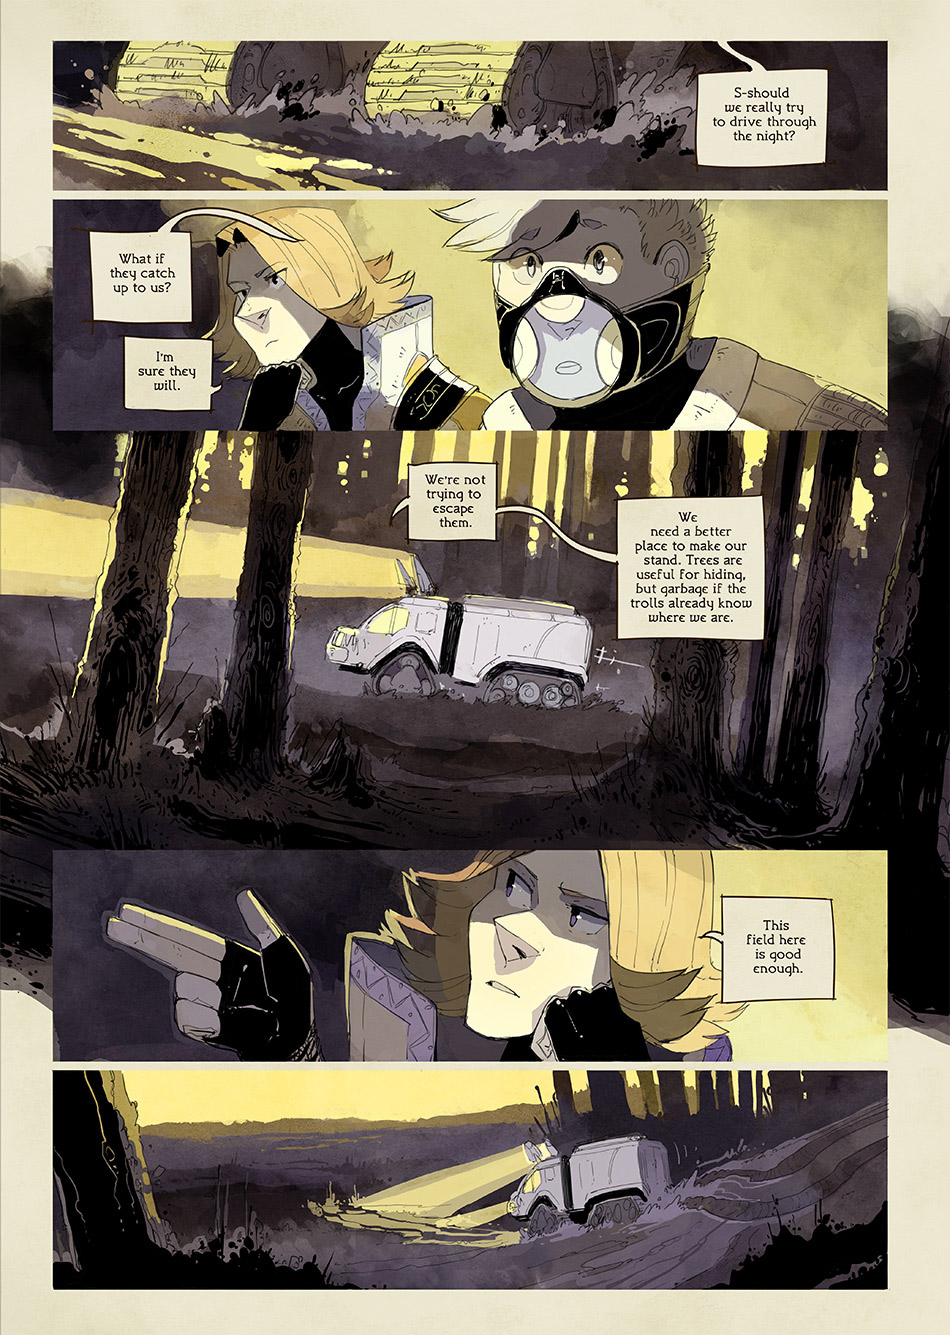 New SSSS page